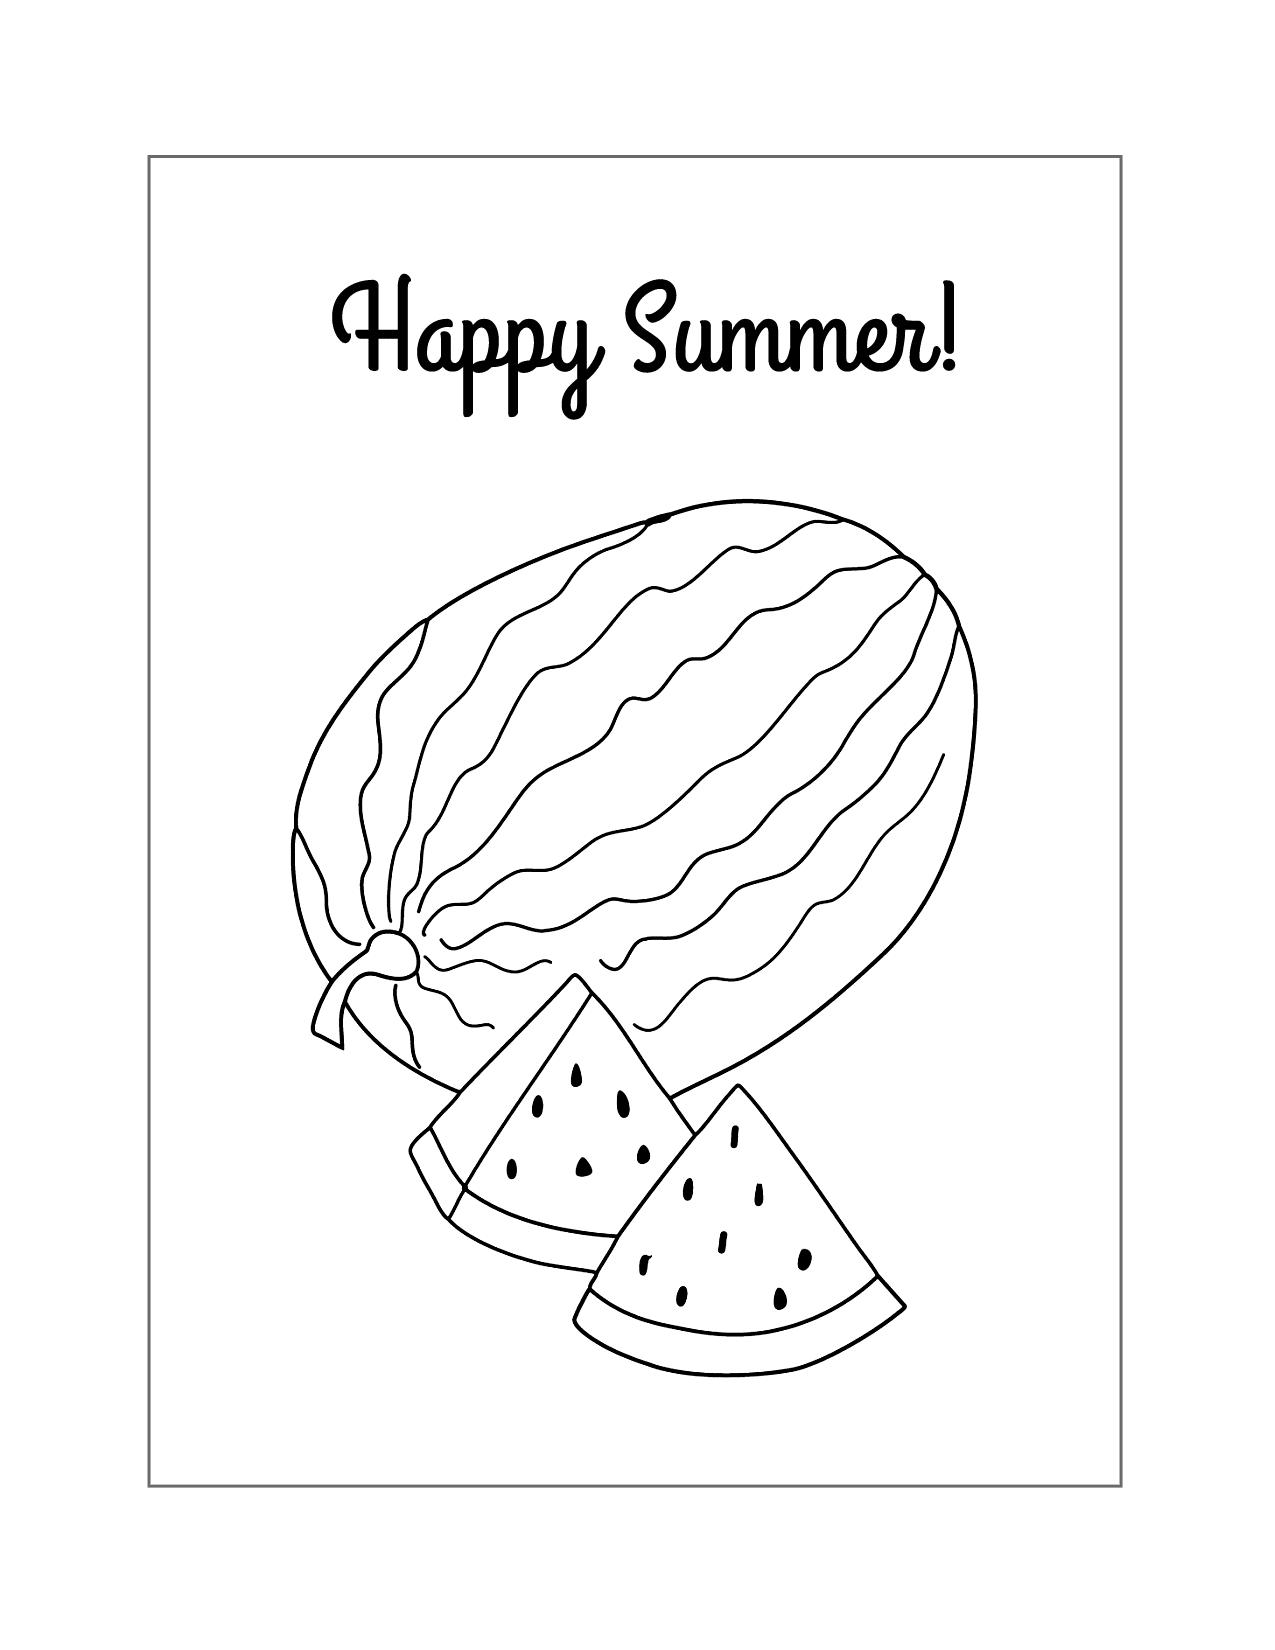 Summer Watermelon Coloring Page